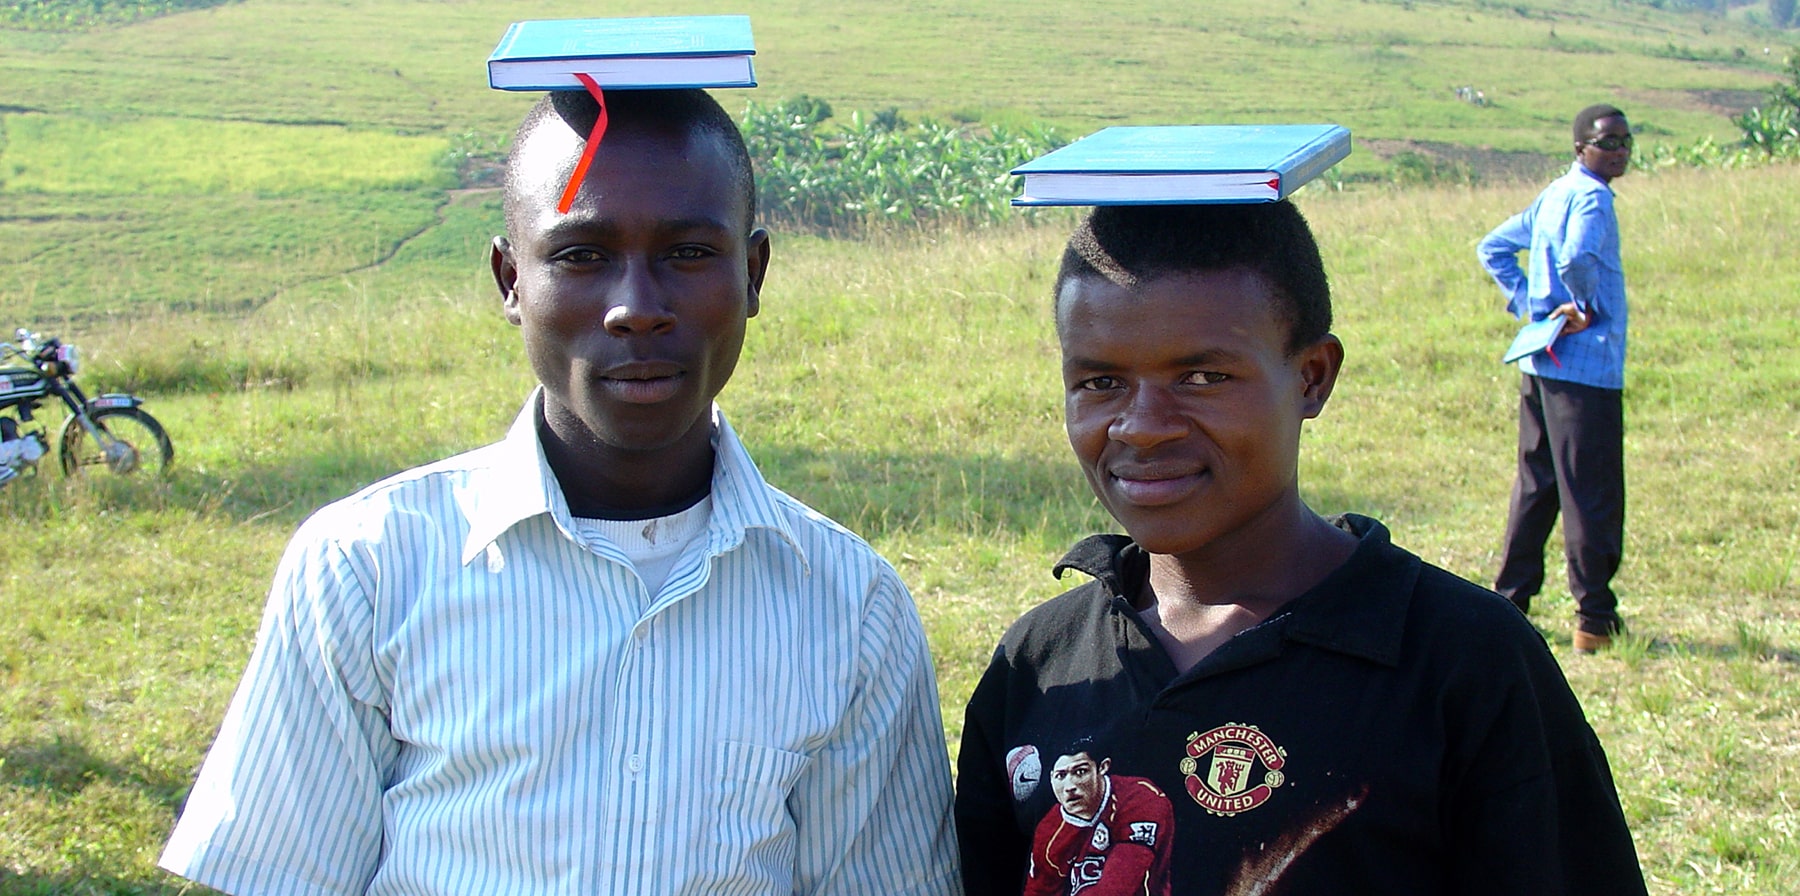 Uganda Boys Balancing Luther's Small Catechisms On Heads